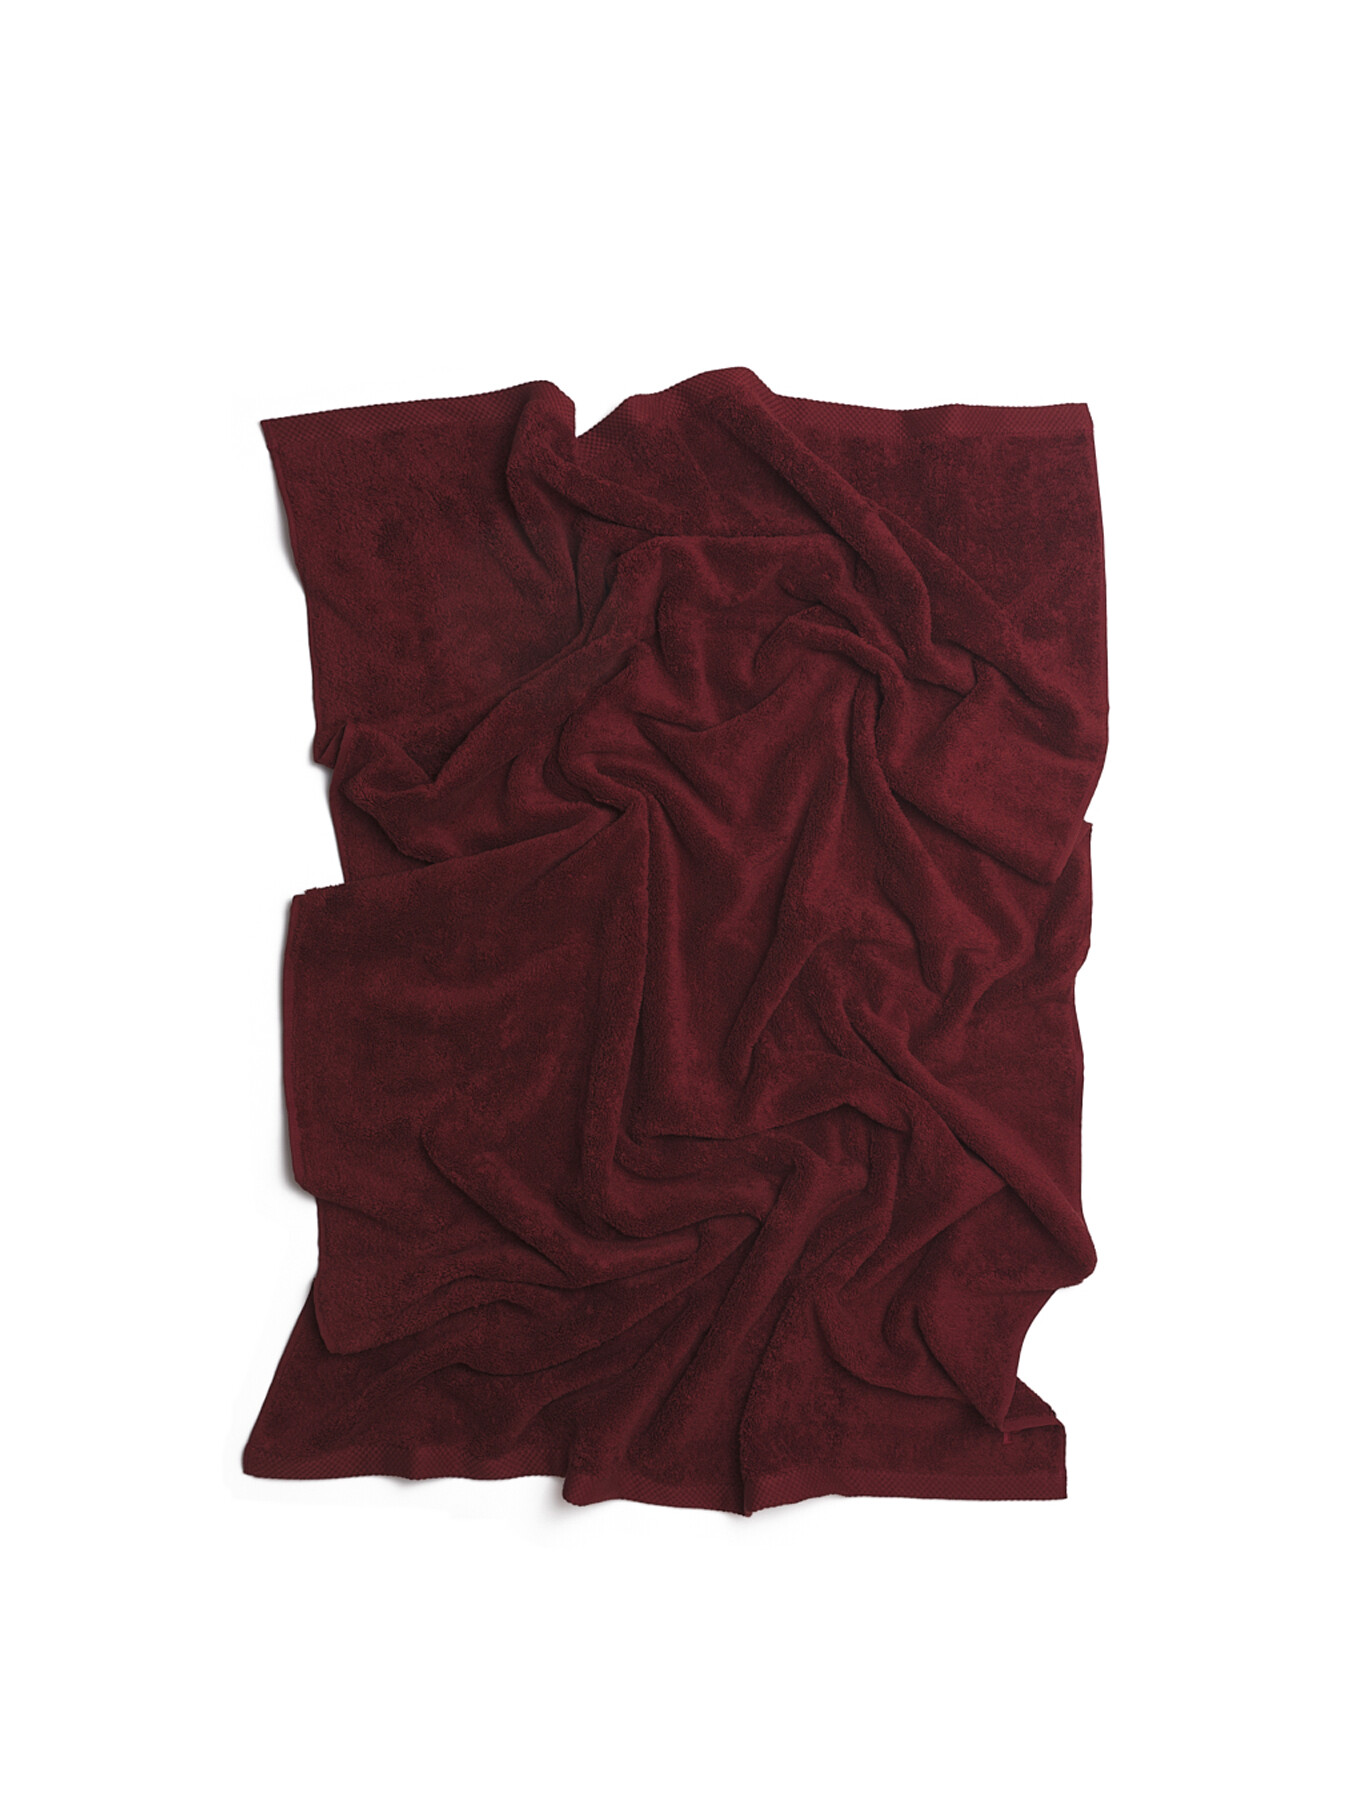 Merlot Organic Cotton Towels Size Bath Towel by Piglet in Bed